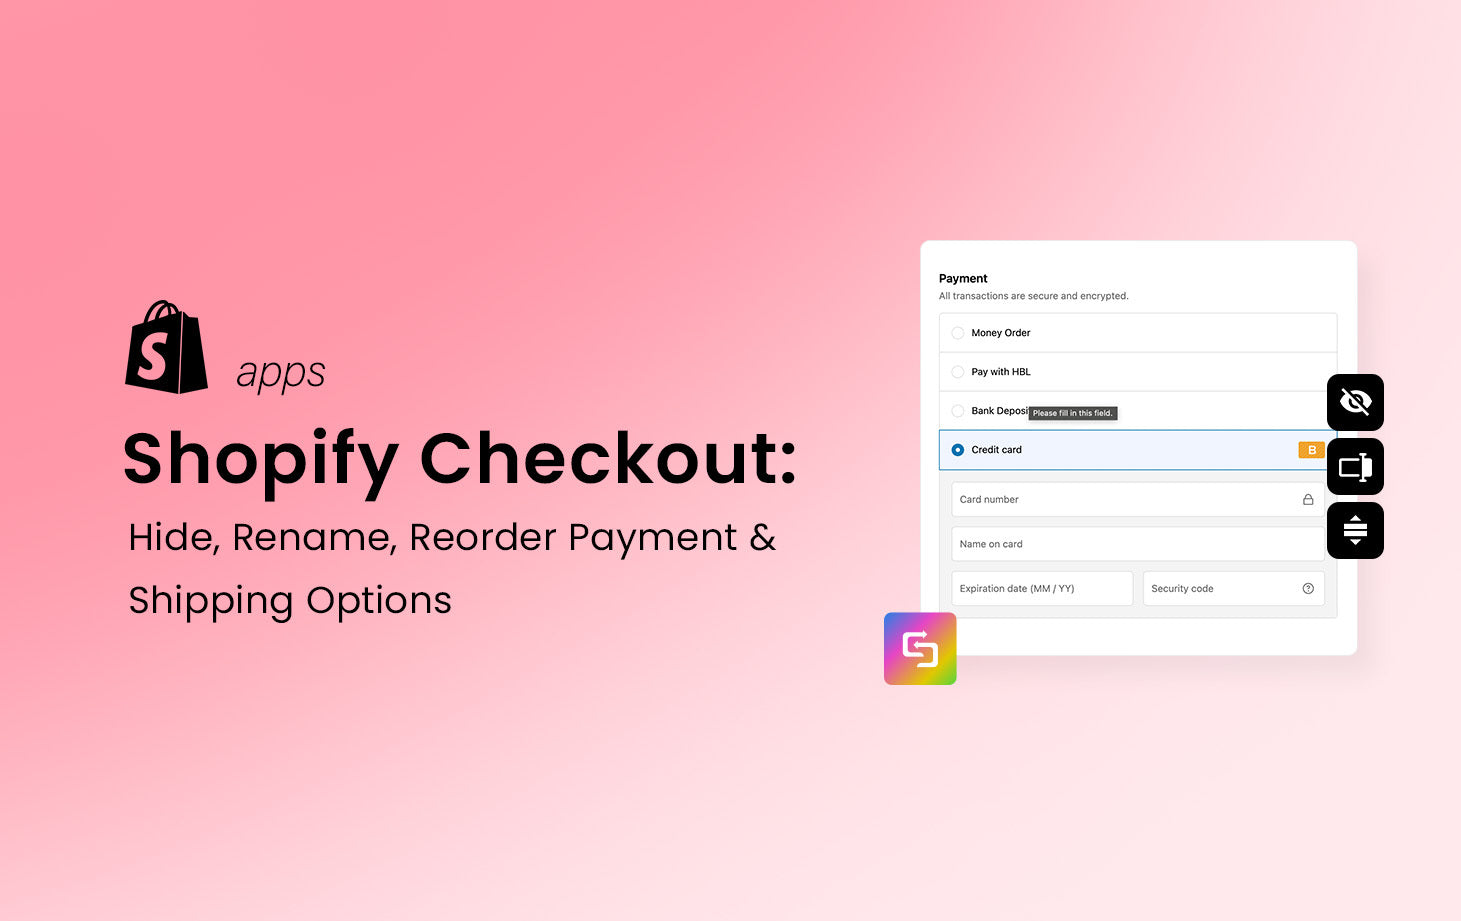 Shopify Checkout: Hide, Rename, Reorder Payment & Delivery Options